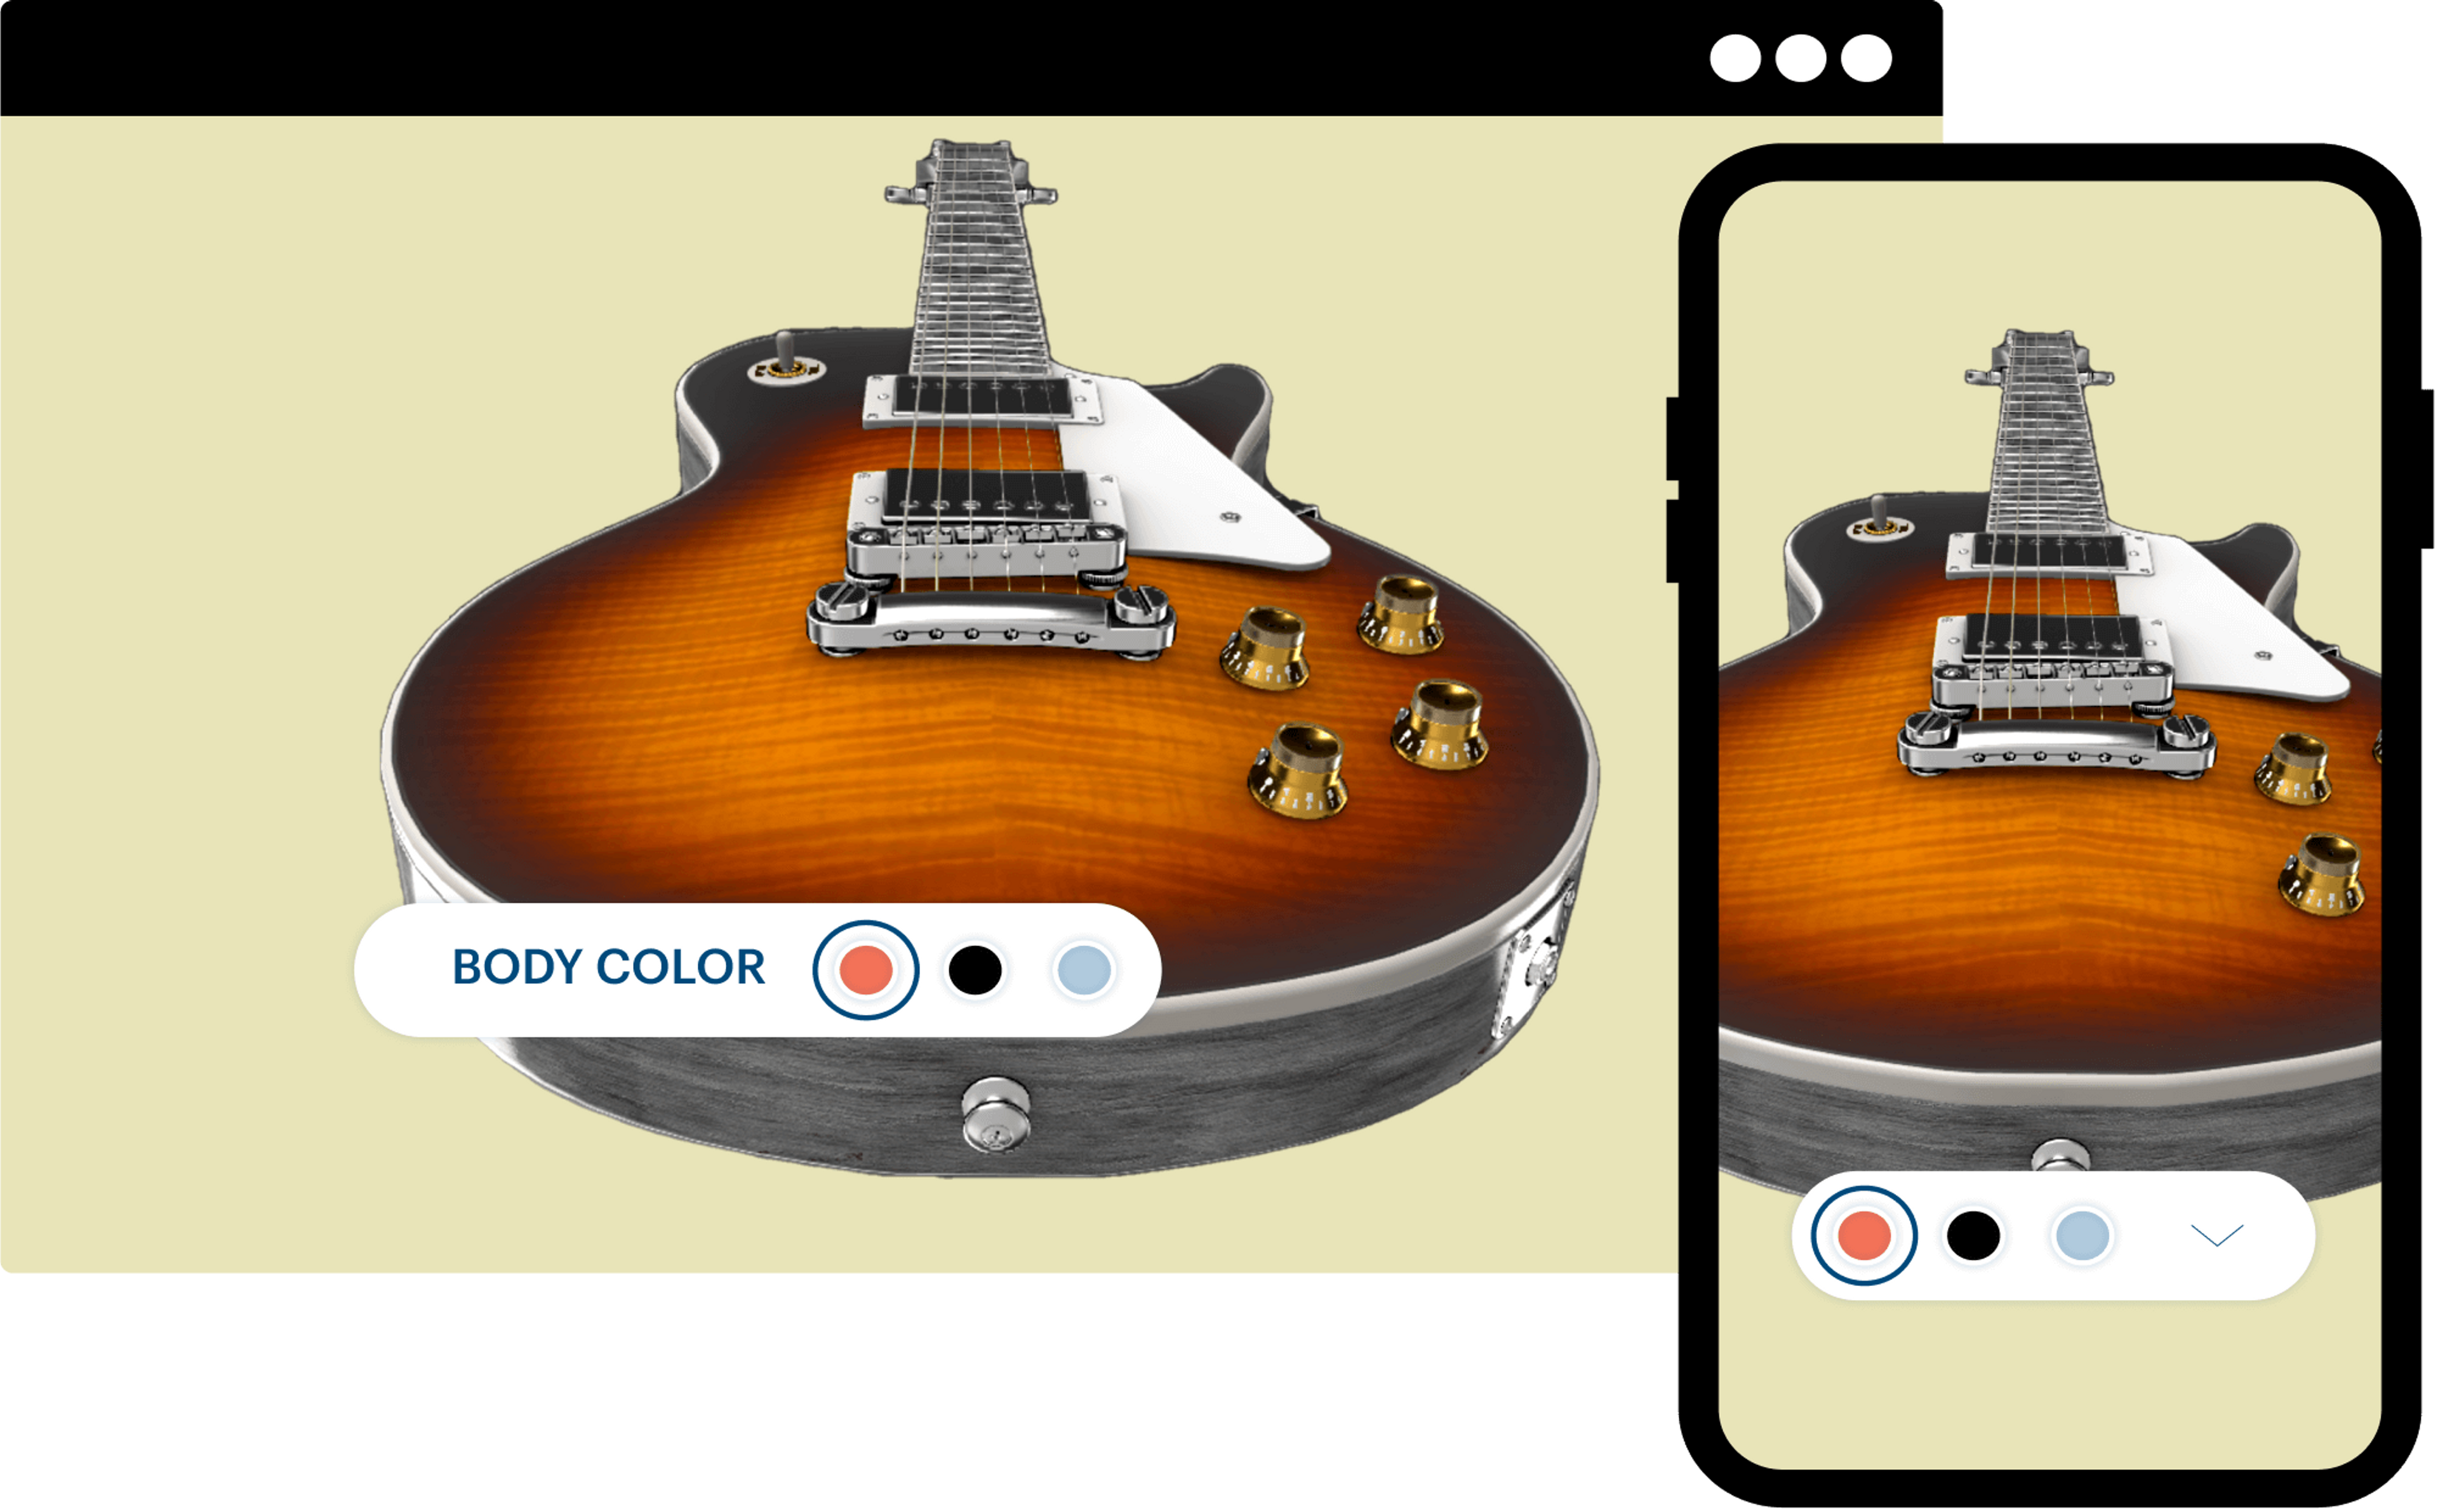 A guitar color selector overlaid on desktop and mobile